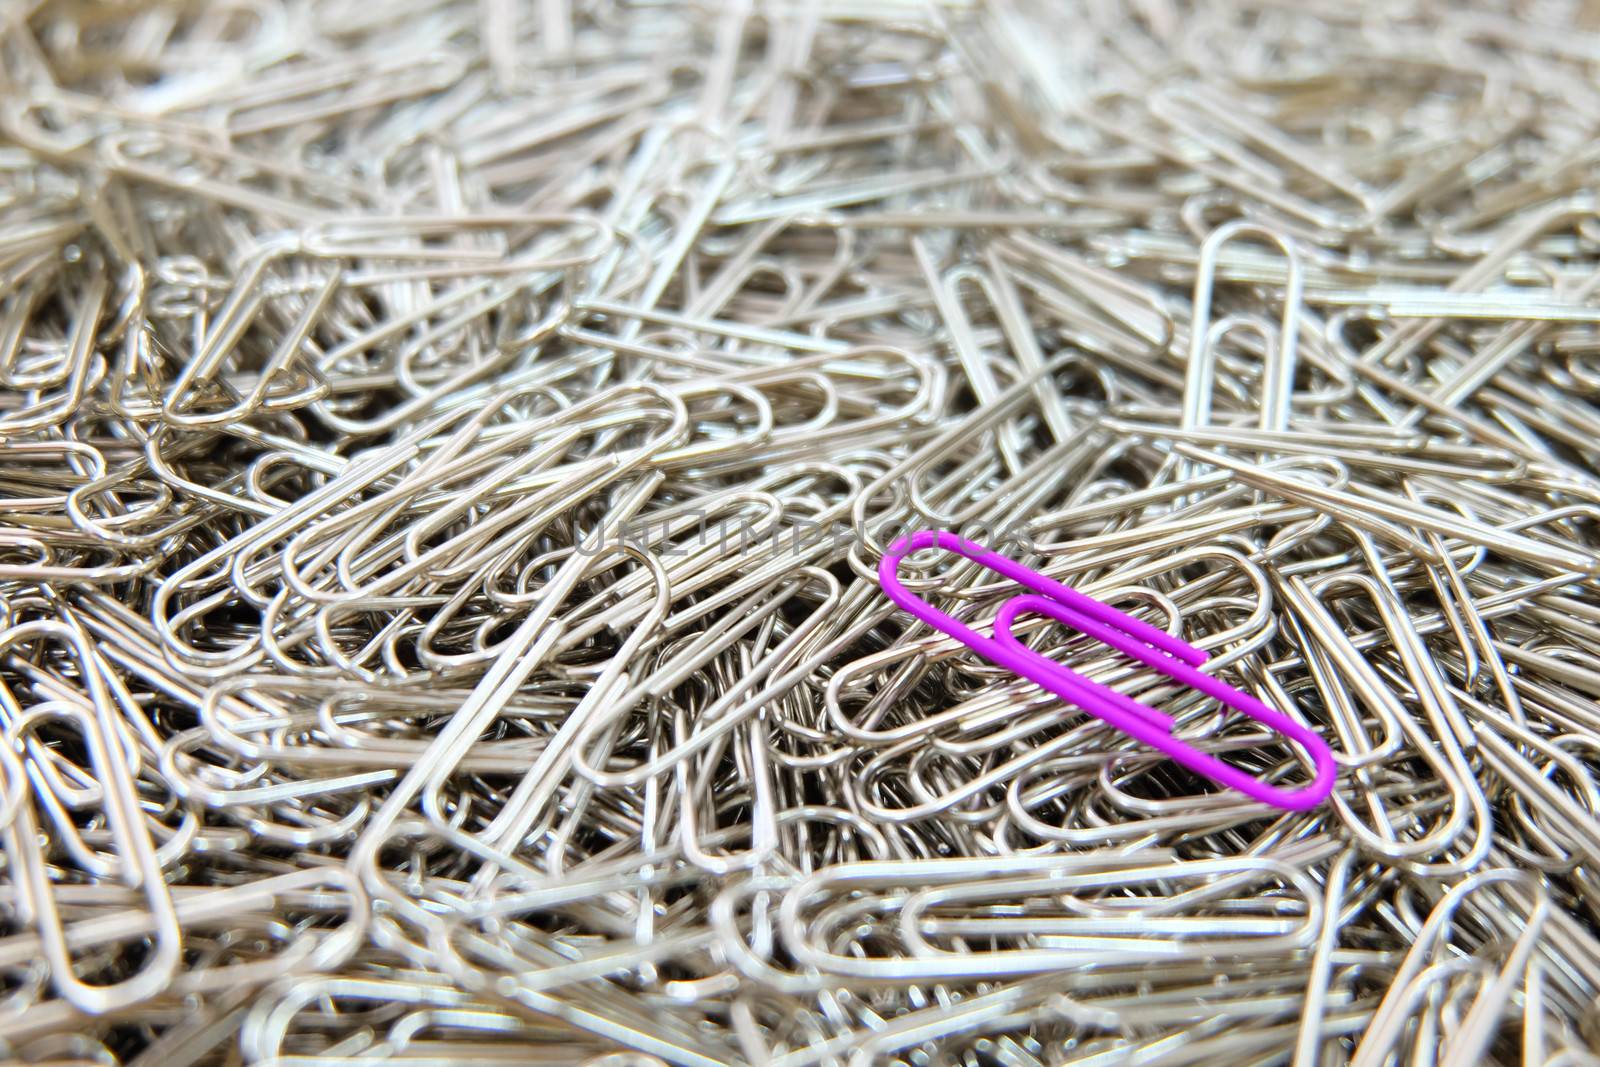 purple paper clip on paper clips background. by e22xua